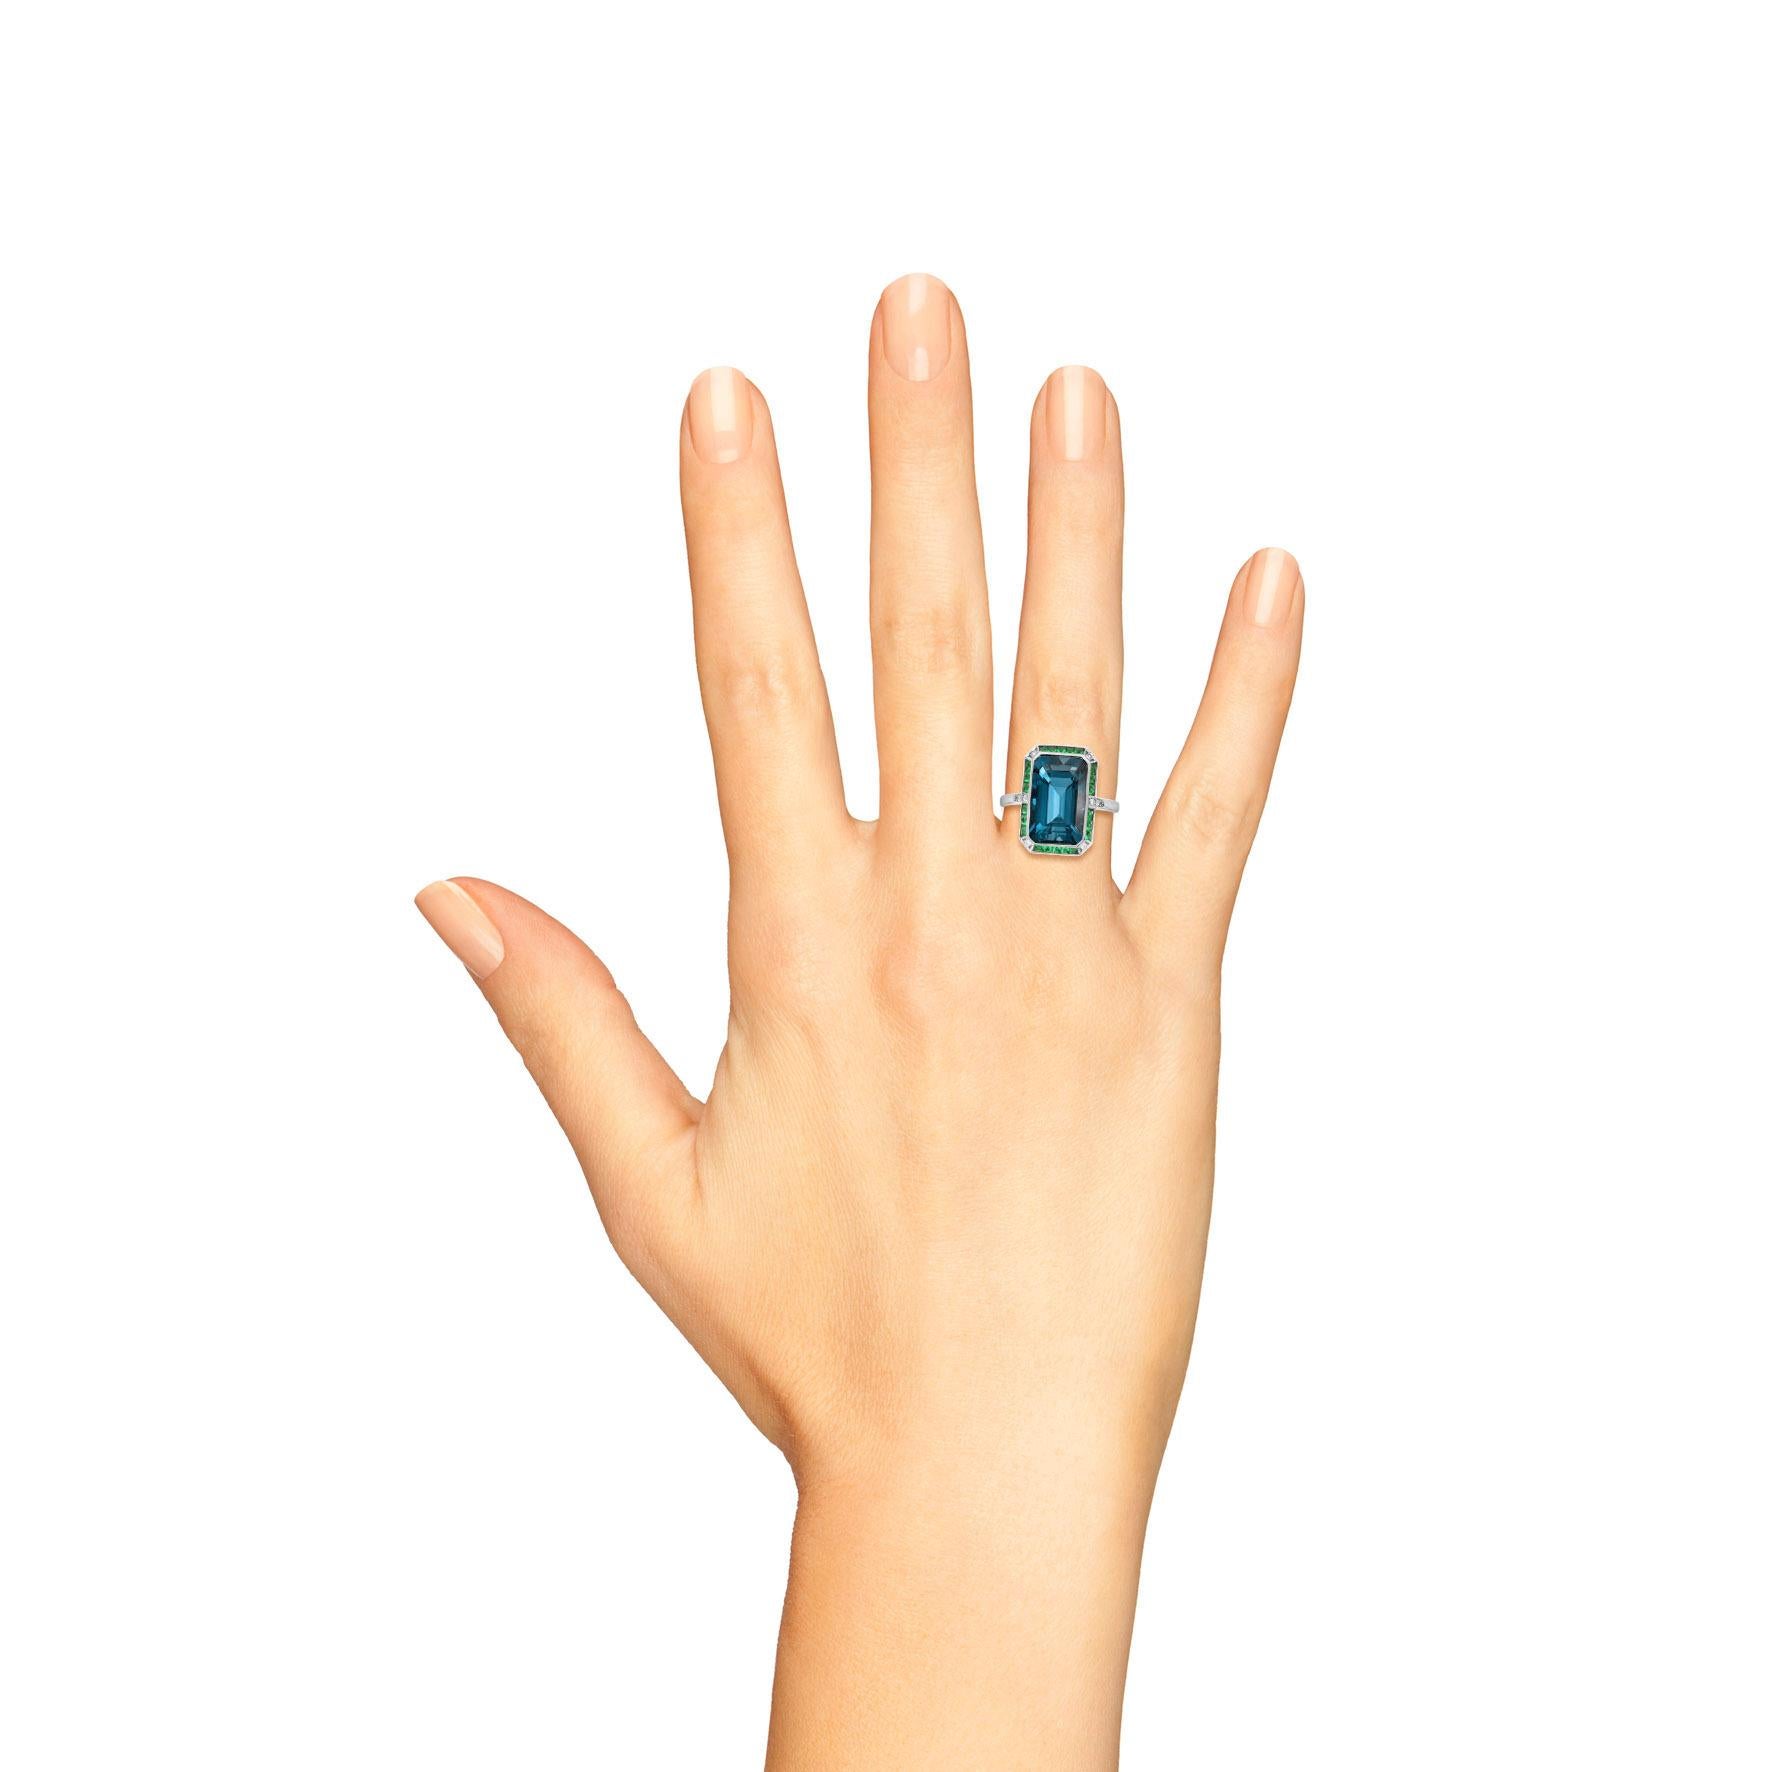 An Art Deco inspired 18K White Gold London blue topaz with emerald and diamond ring. The ring consists of one central emerald cut London blue topaz surrounded by French cut emeralds and round cut diamonds. 

Ring Information
Style: Art-deco
Metal: